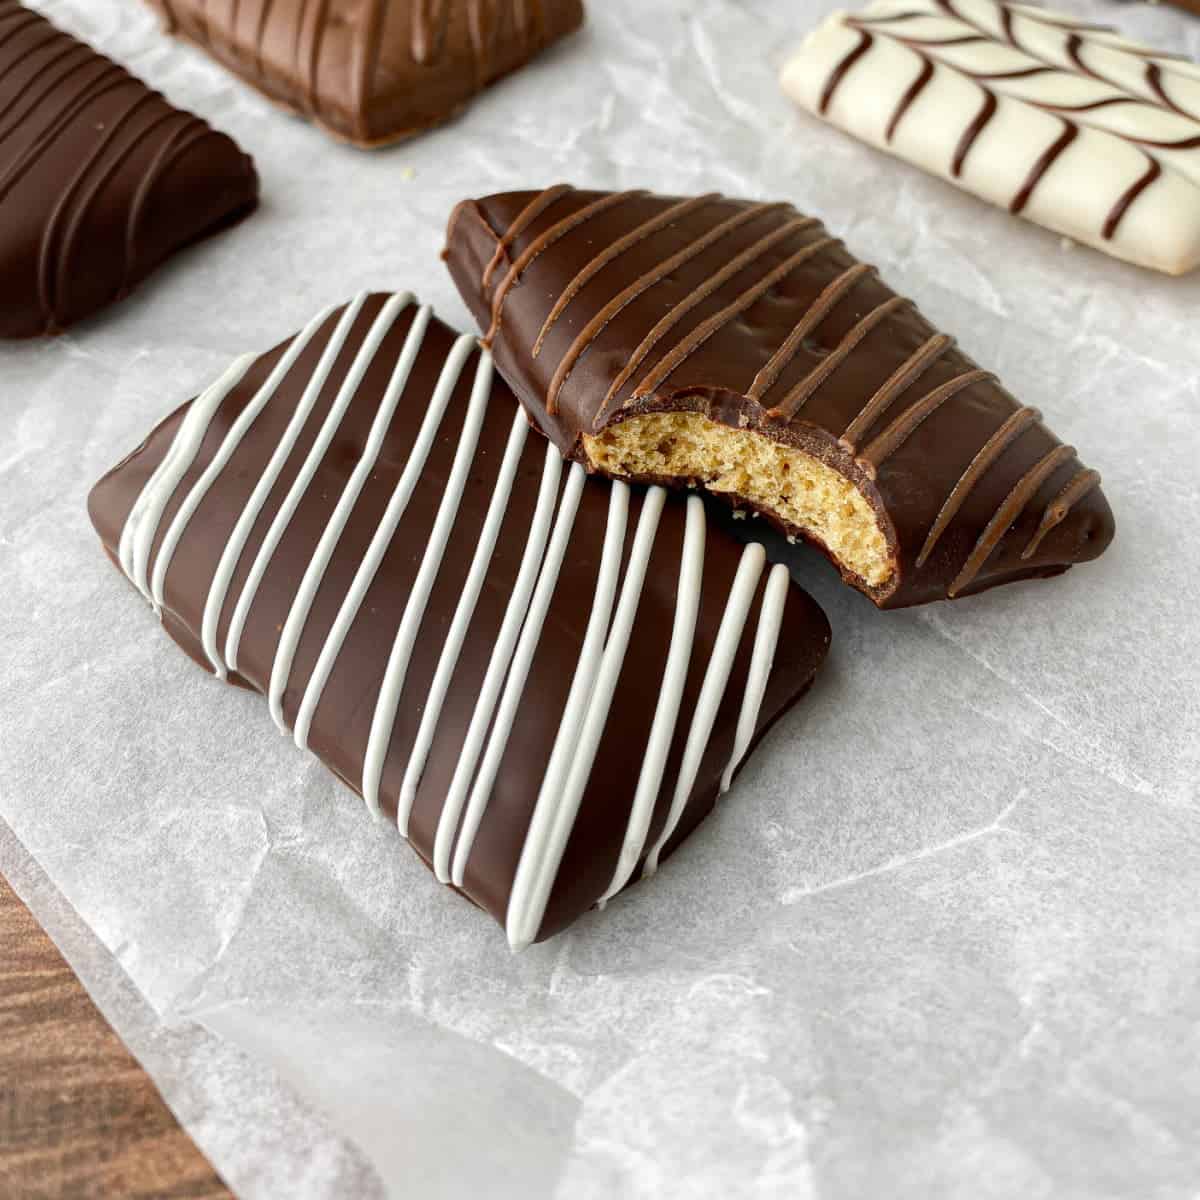 Chocolate Covered Graham Crackers Recipe: Step by Step Guide